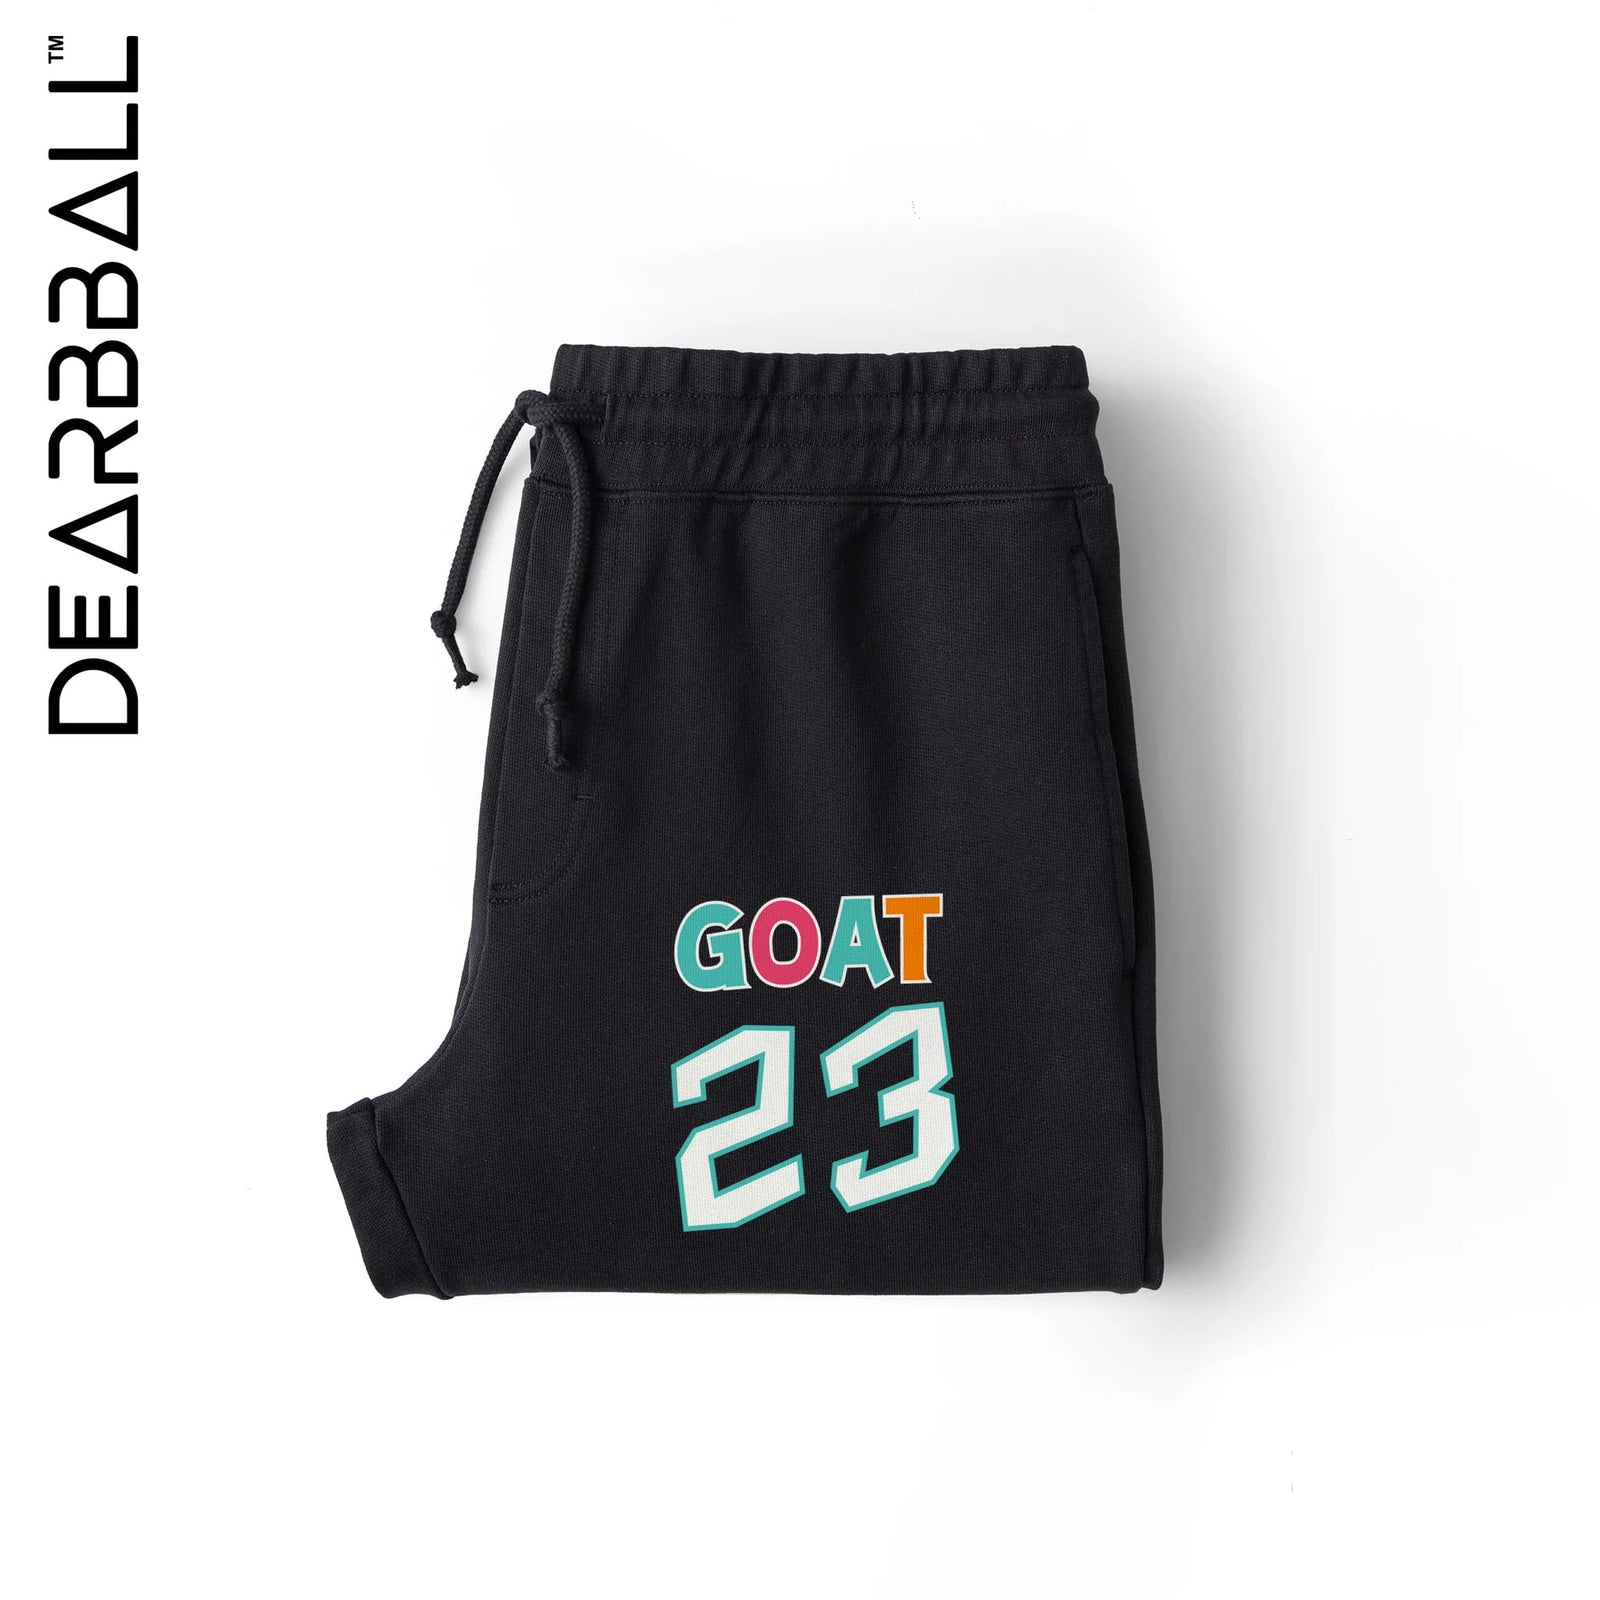 DEARBBALL SHORTS MESH CHICAGO - LEGEND 23 LIMITED EDITION - DearBBall™